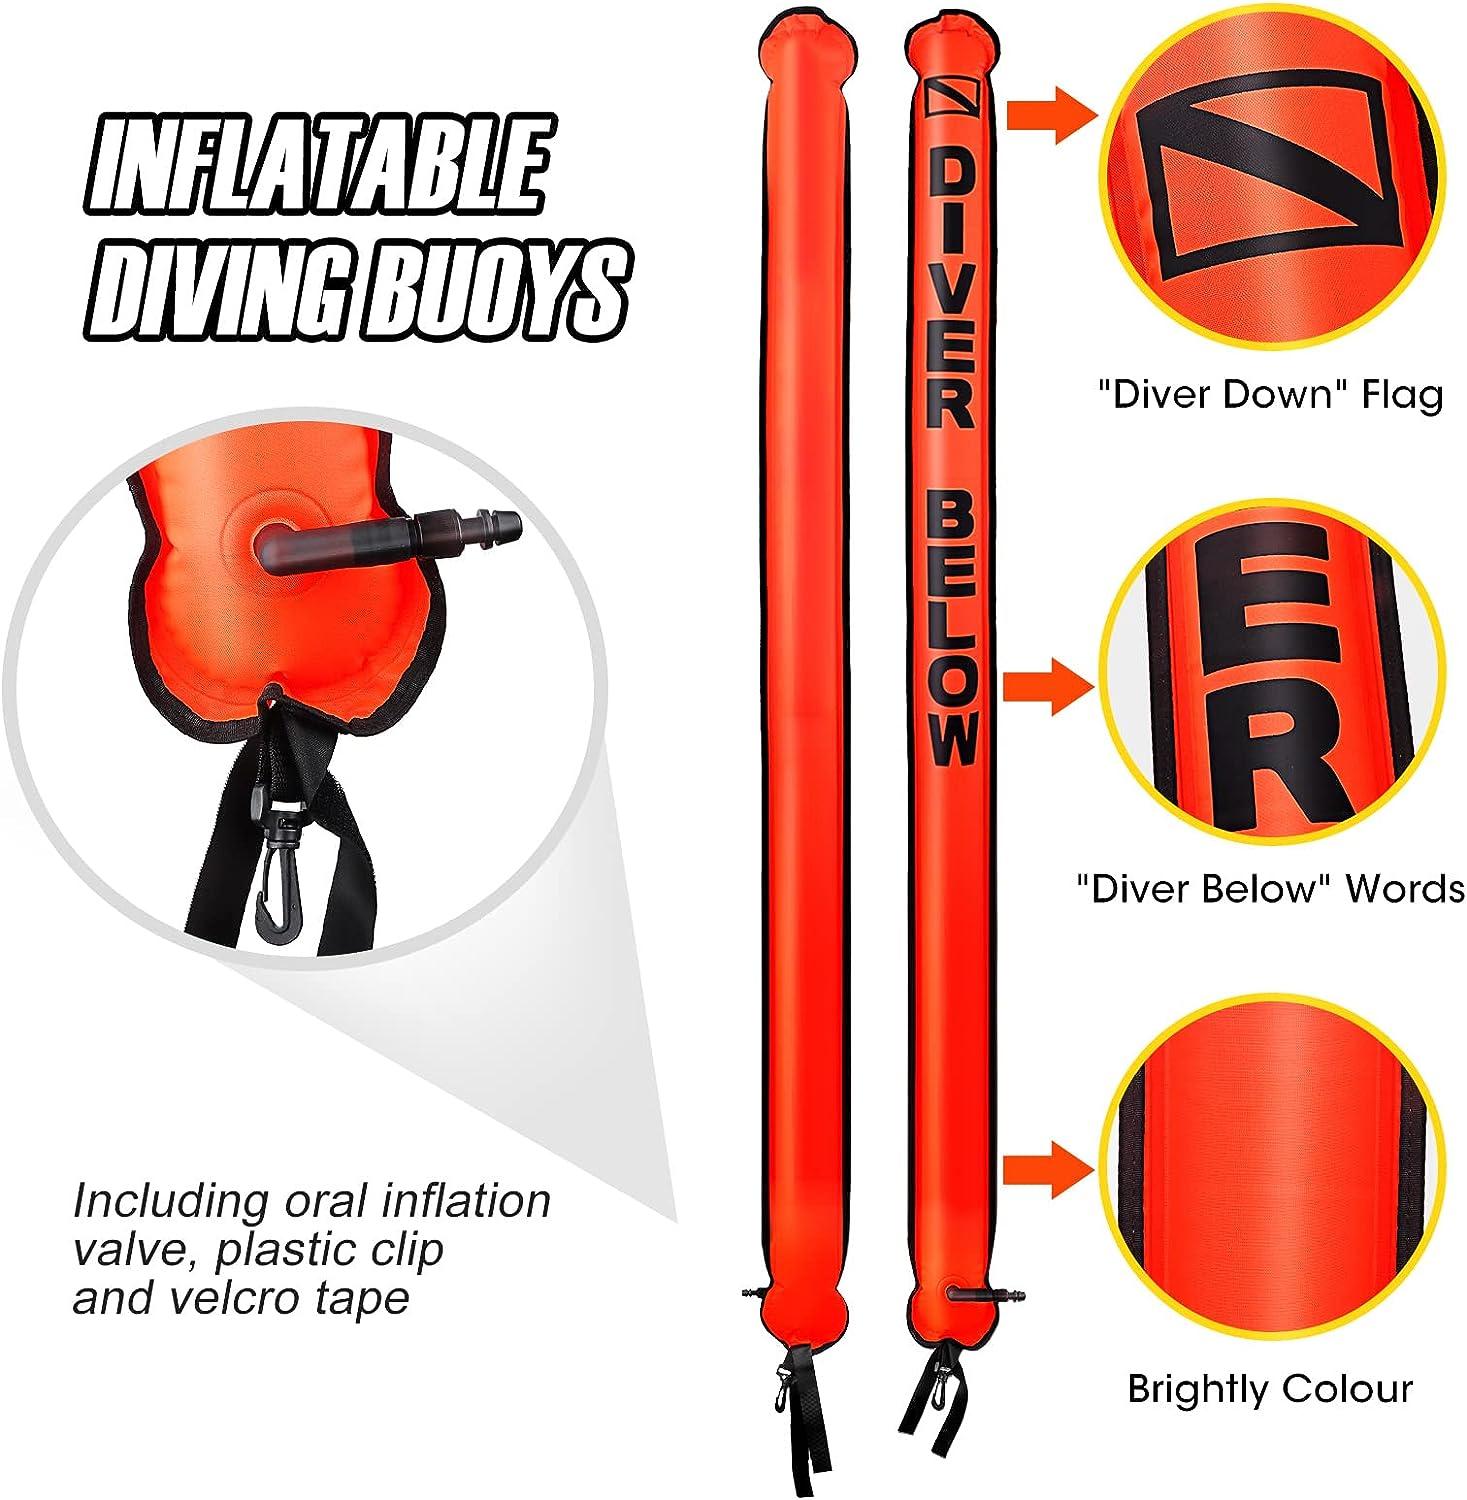  Surface Marker Buoy Scuba with Reel, 5ft High Visibility Diving  Open Bottom Signal Tube Safety Sausage with Pouch Bag, 100ft ABS Dive Reel  and Steel Double-Ended Bolt Snap (Hi-Vi Yellow) 